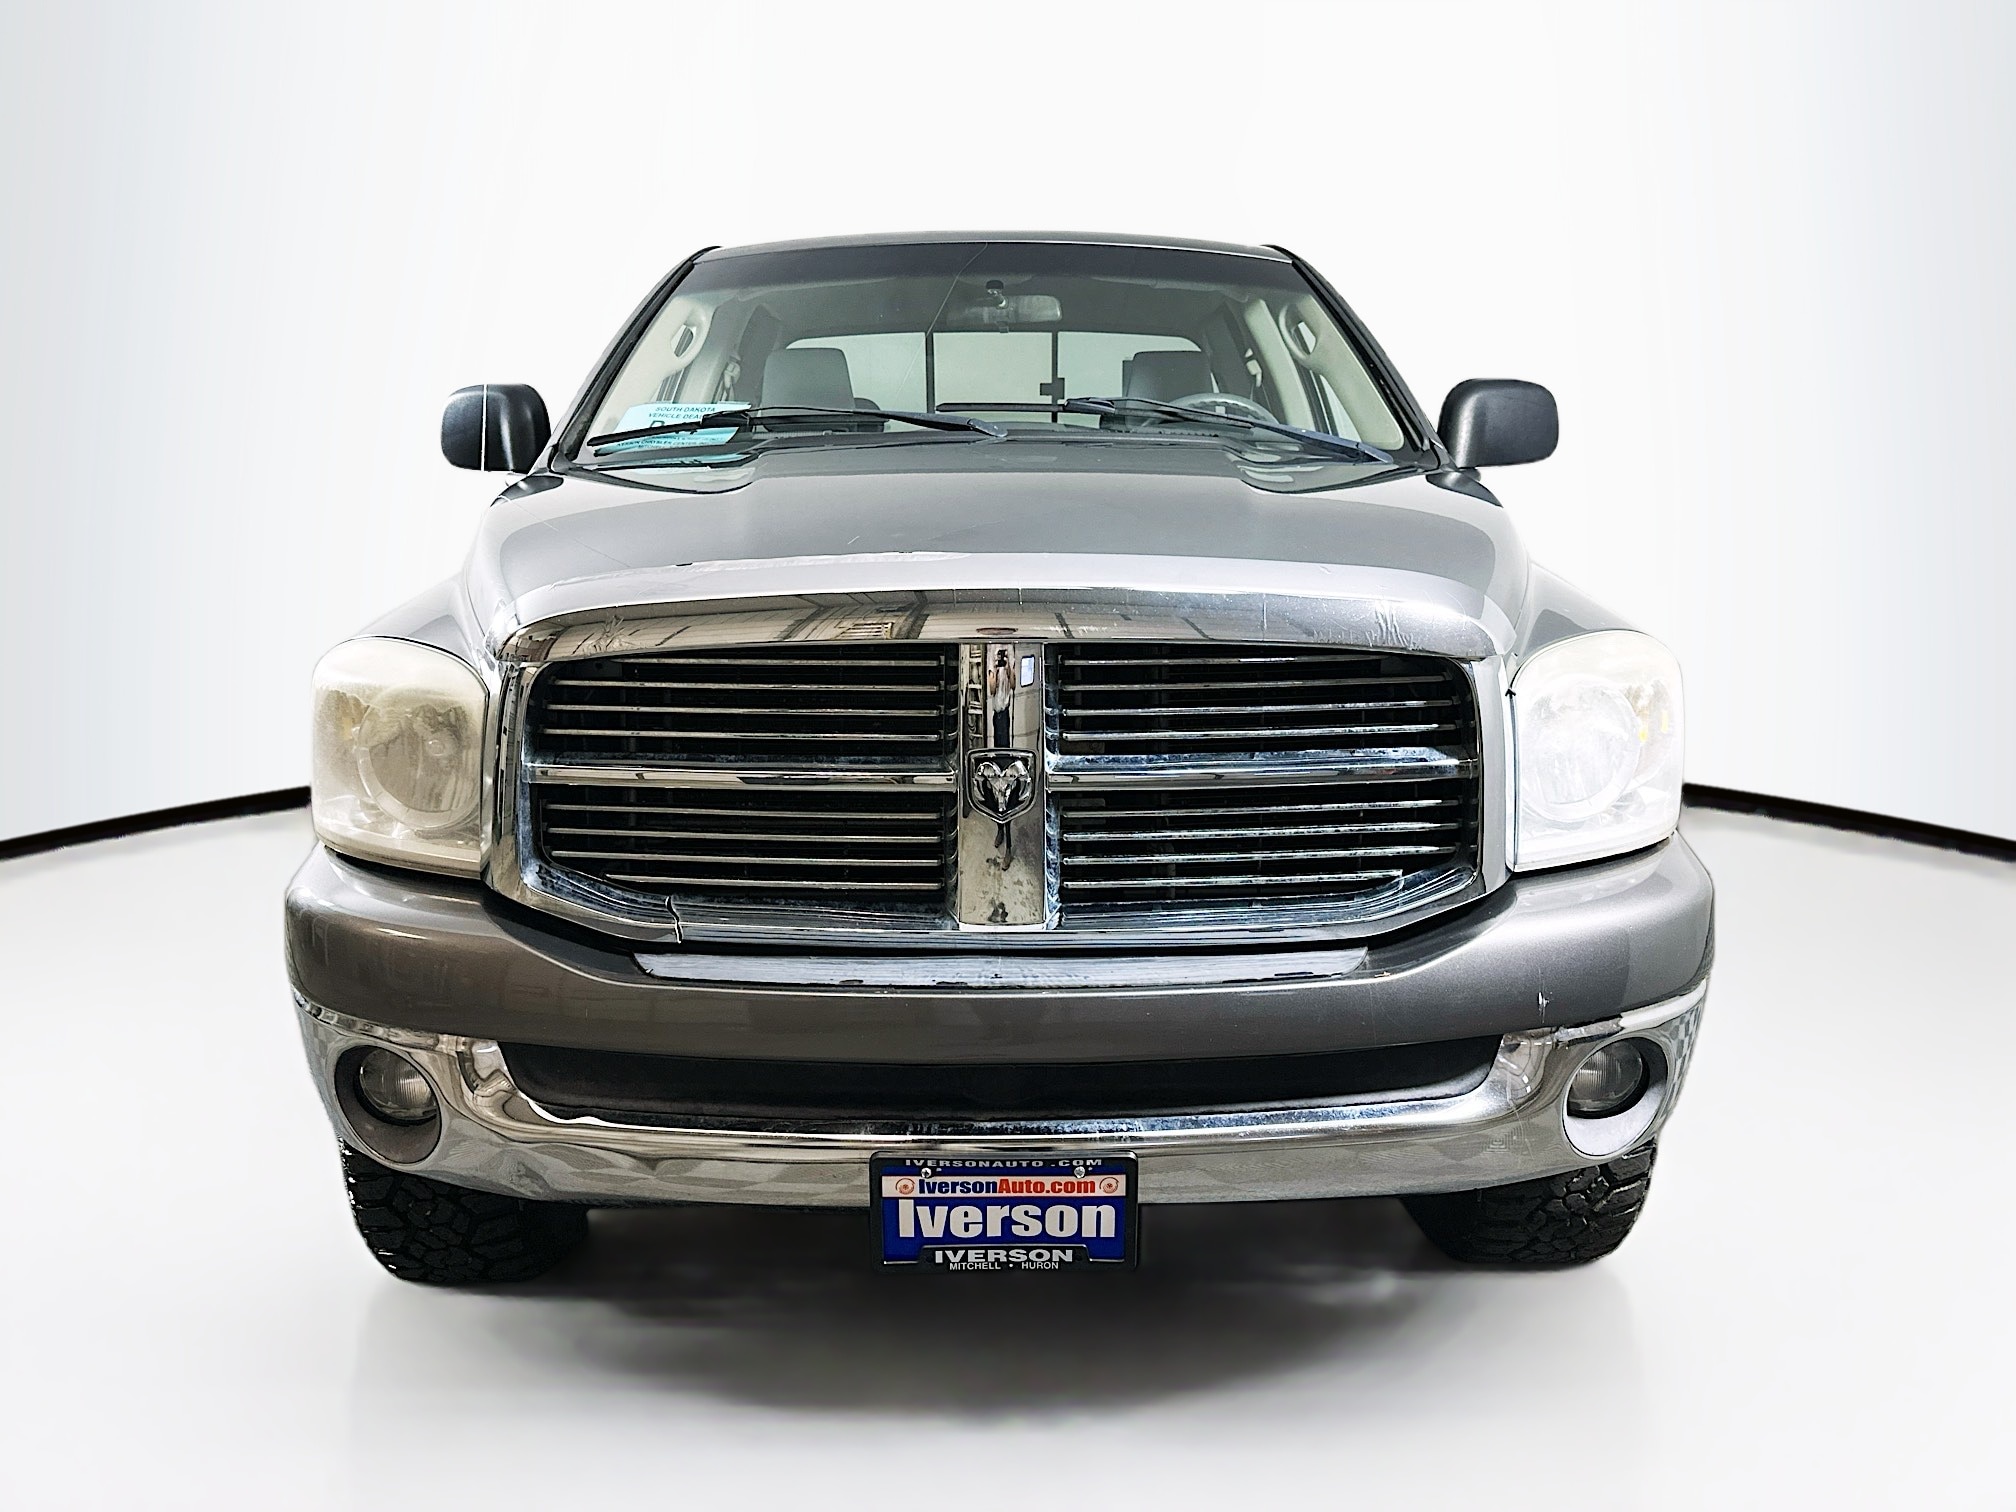 Used 2007 Dodge Ram 1500 Pickup TRX4 Off Road with VIN 1D7HU18287S262646 for sale in Mitchell, SD